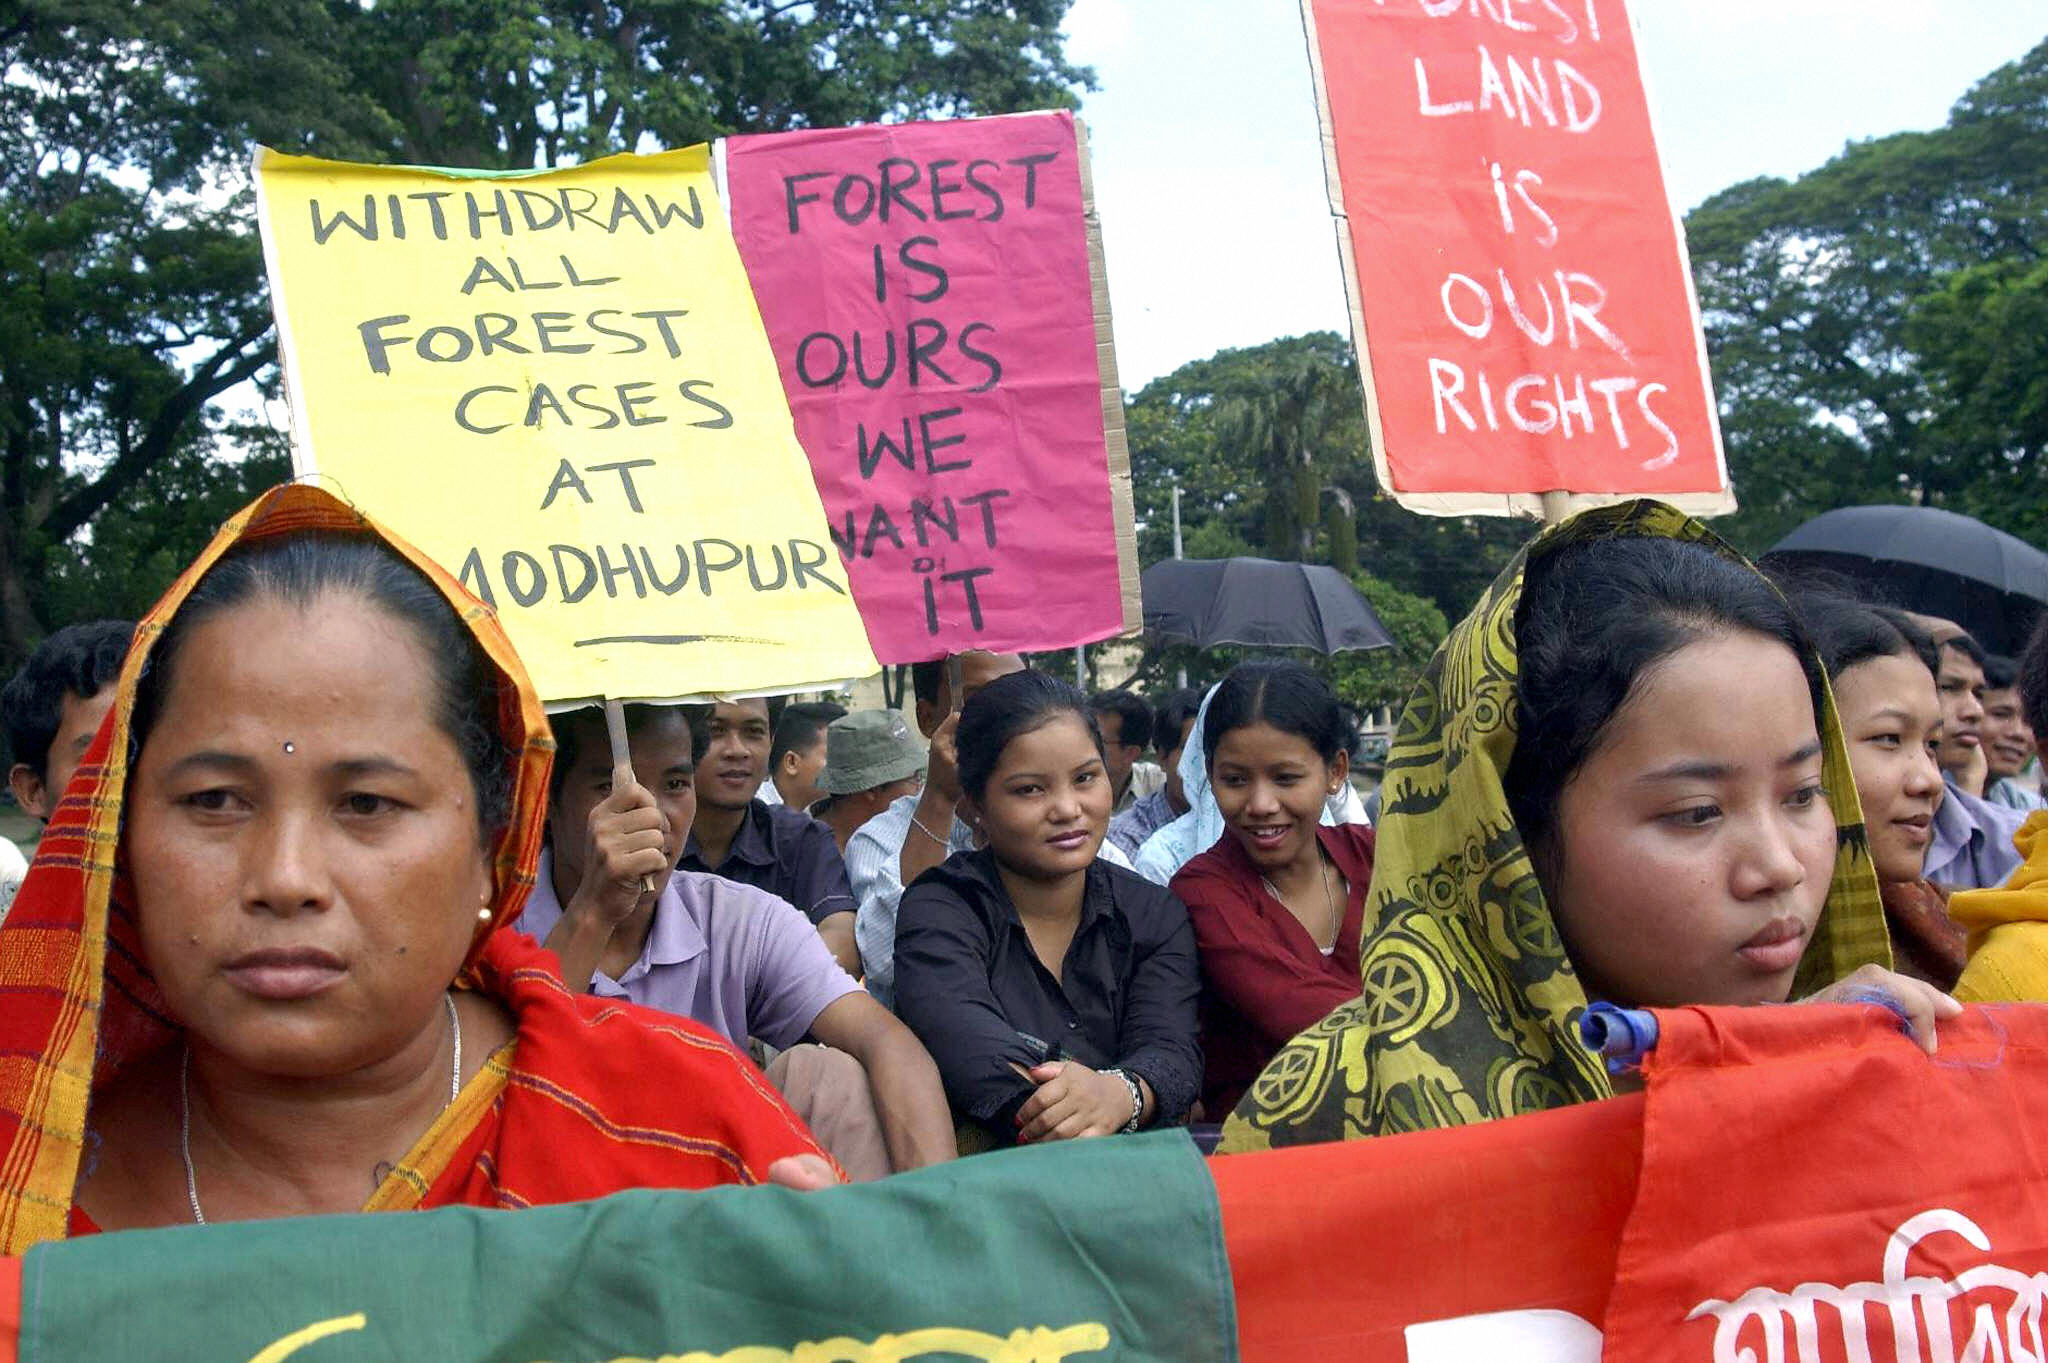 Indigenous Bangladeshi women during a demonstration demanding an end to encroaching development on their lands, still asking for the rights Kalpana Chakma fought for before her disappearance (Photo Credit: Shawkat Khan/AFP/Getty Images).